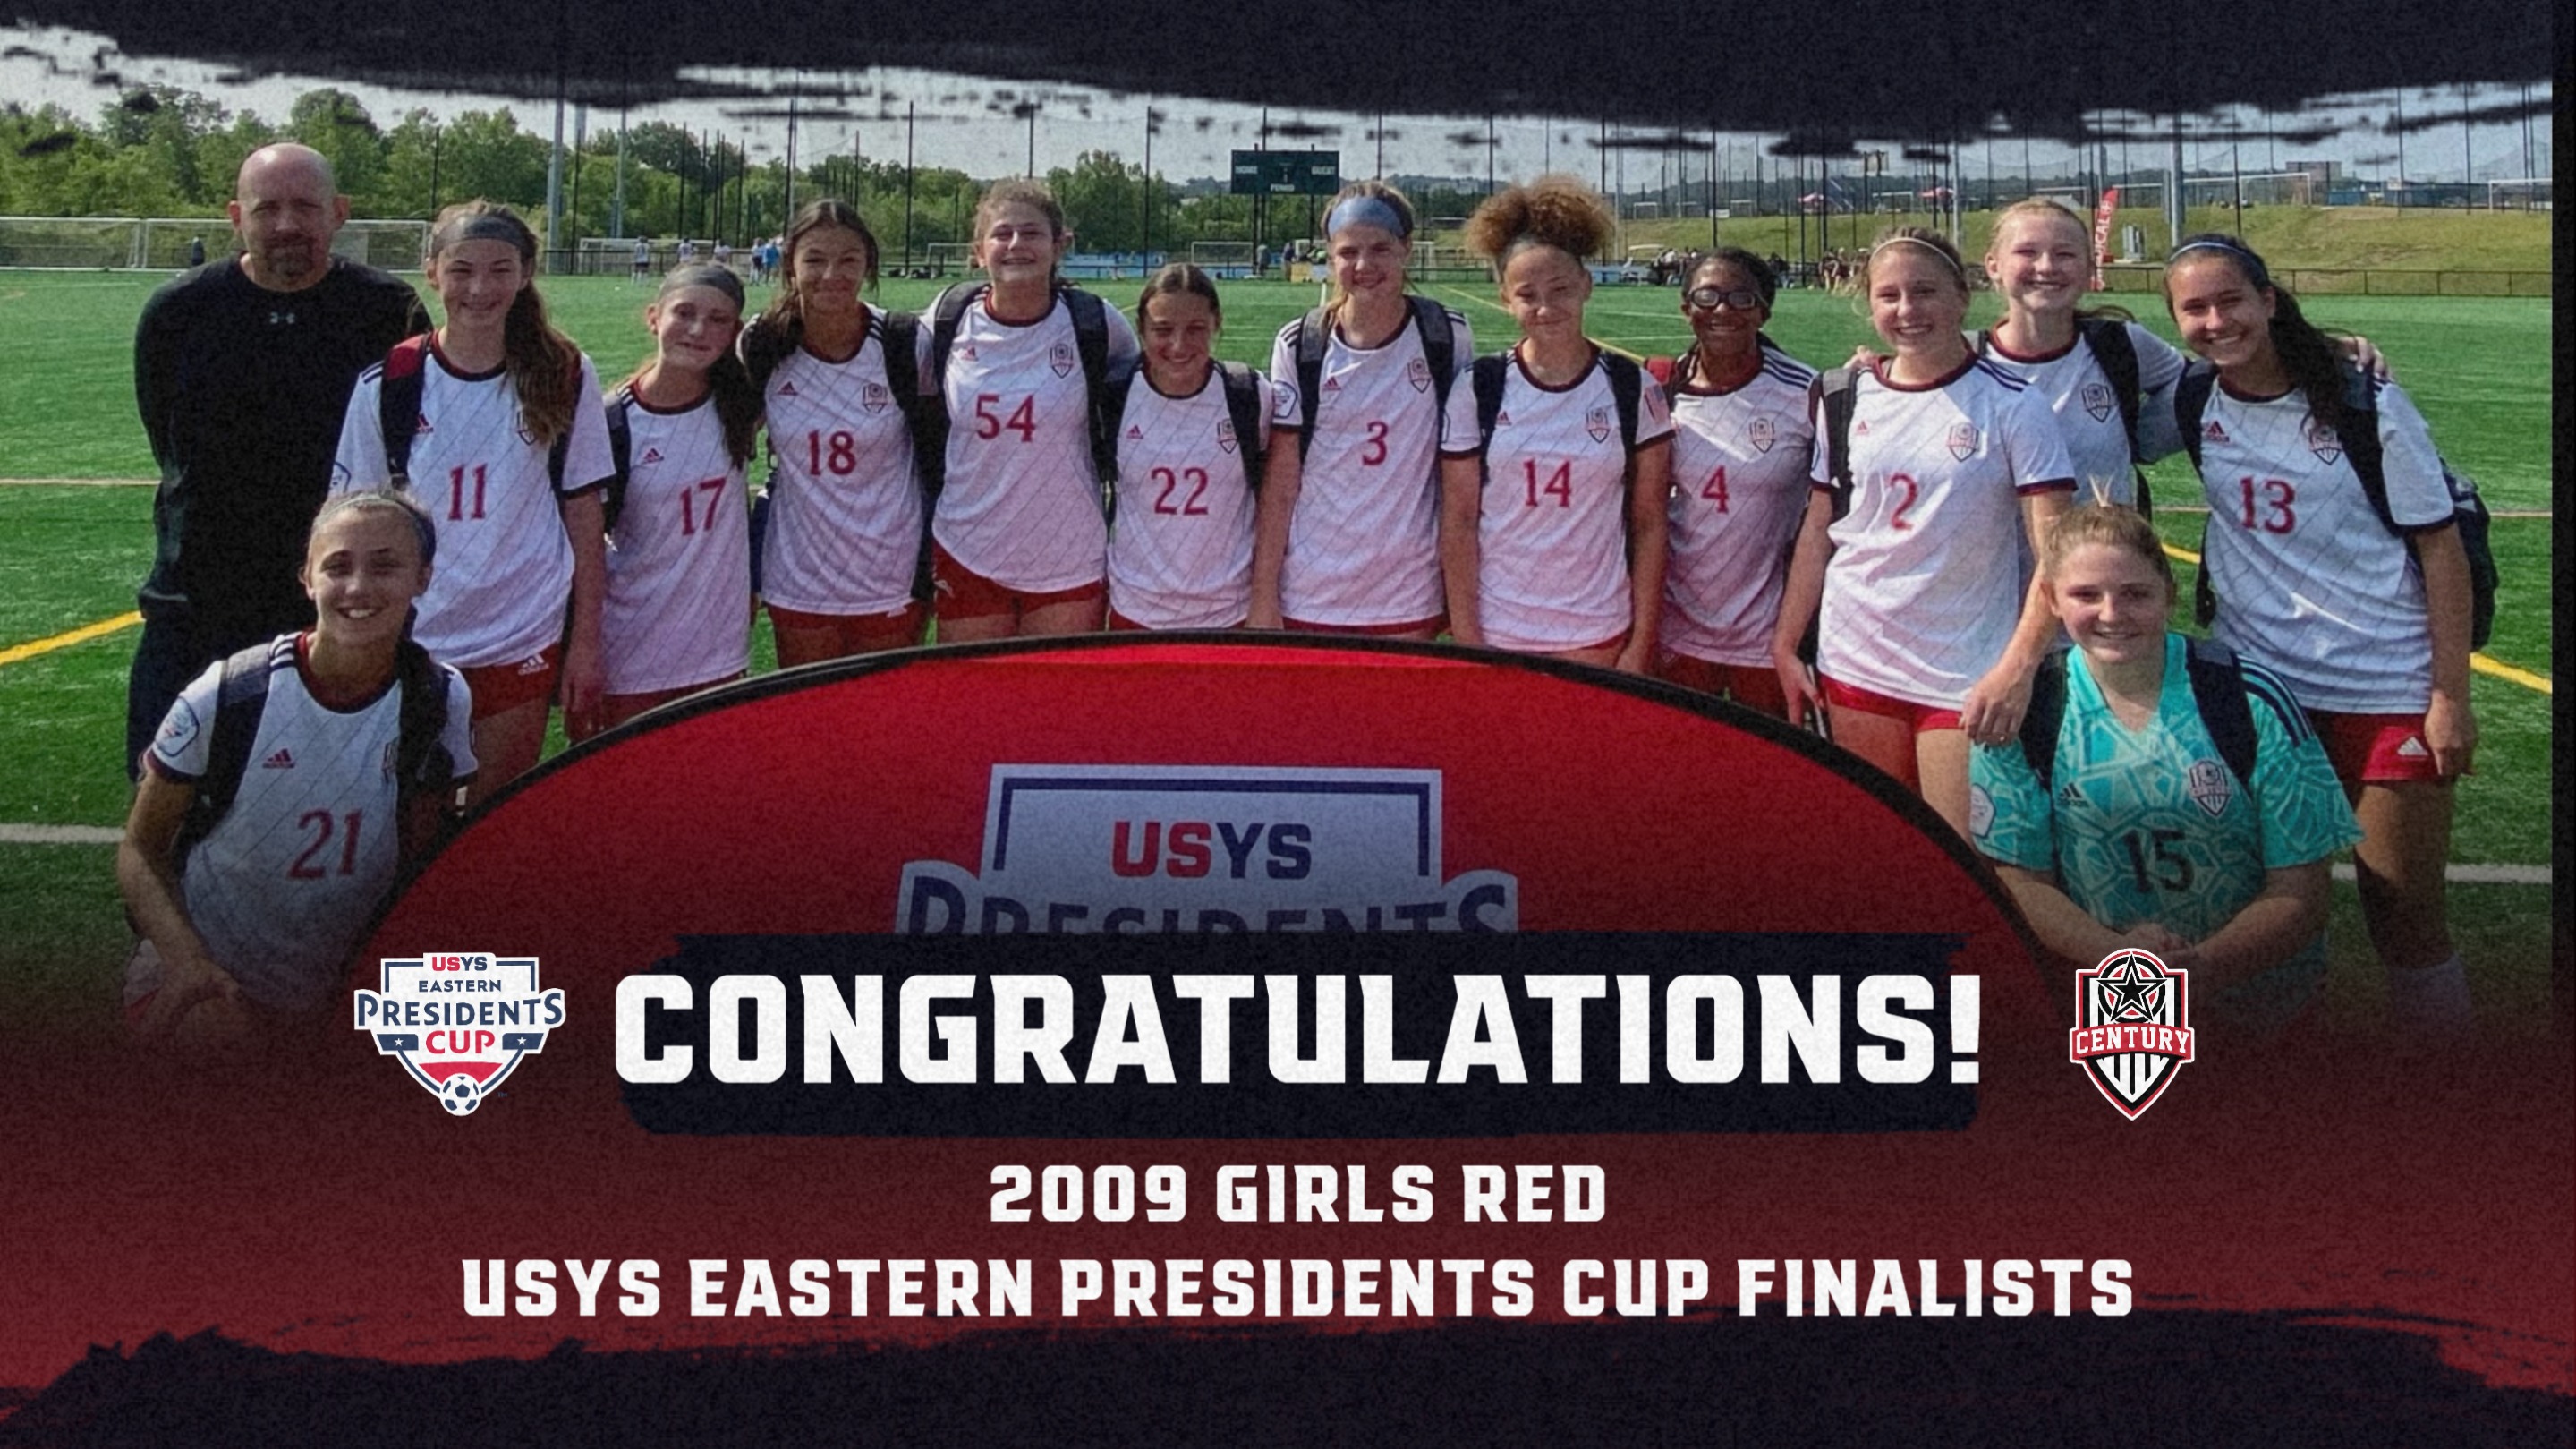 2009 Girls Red are Finalists at Eastern Presidents Cup Century FC